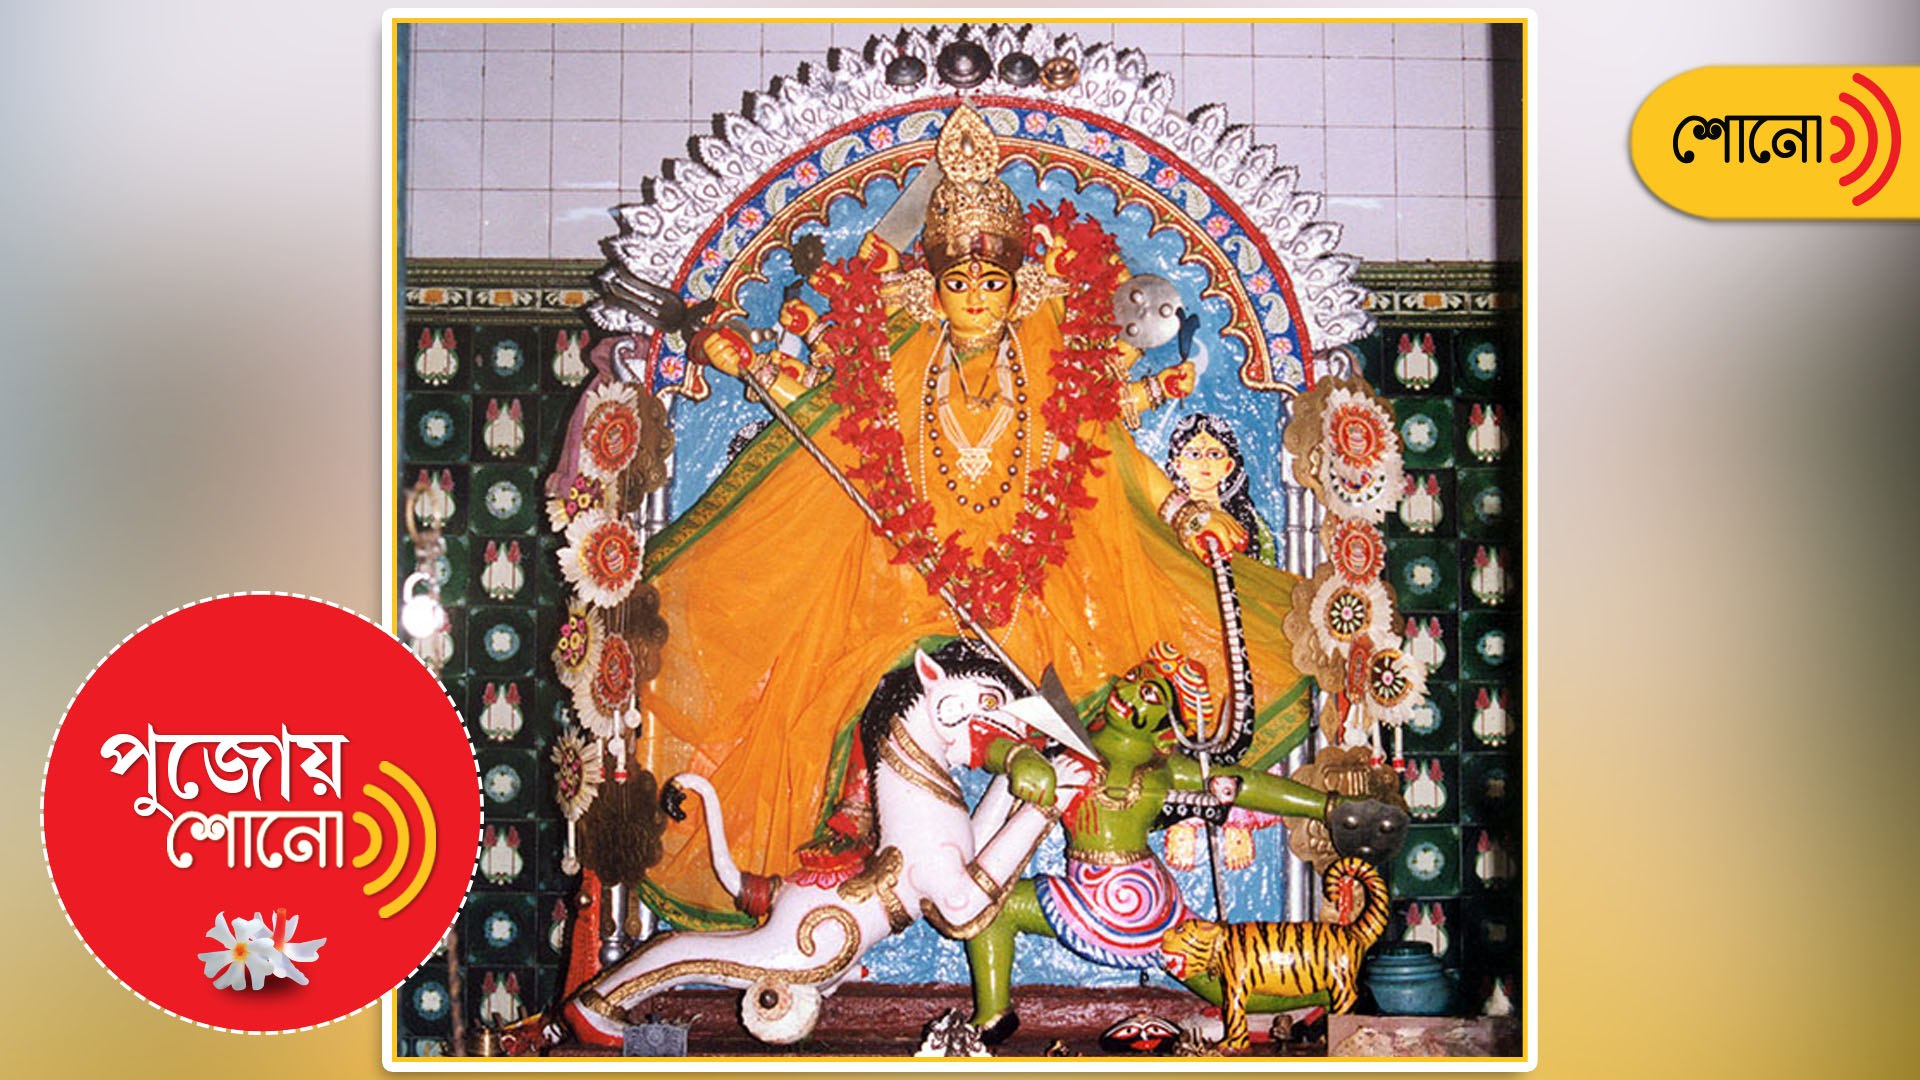 know more about The temple of Chiteswari at Chitpur Bazaar